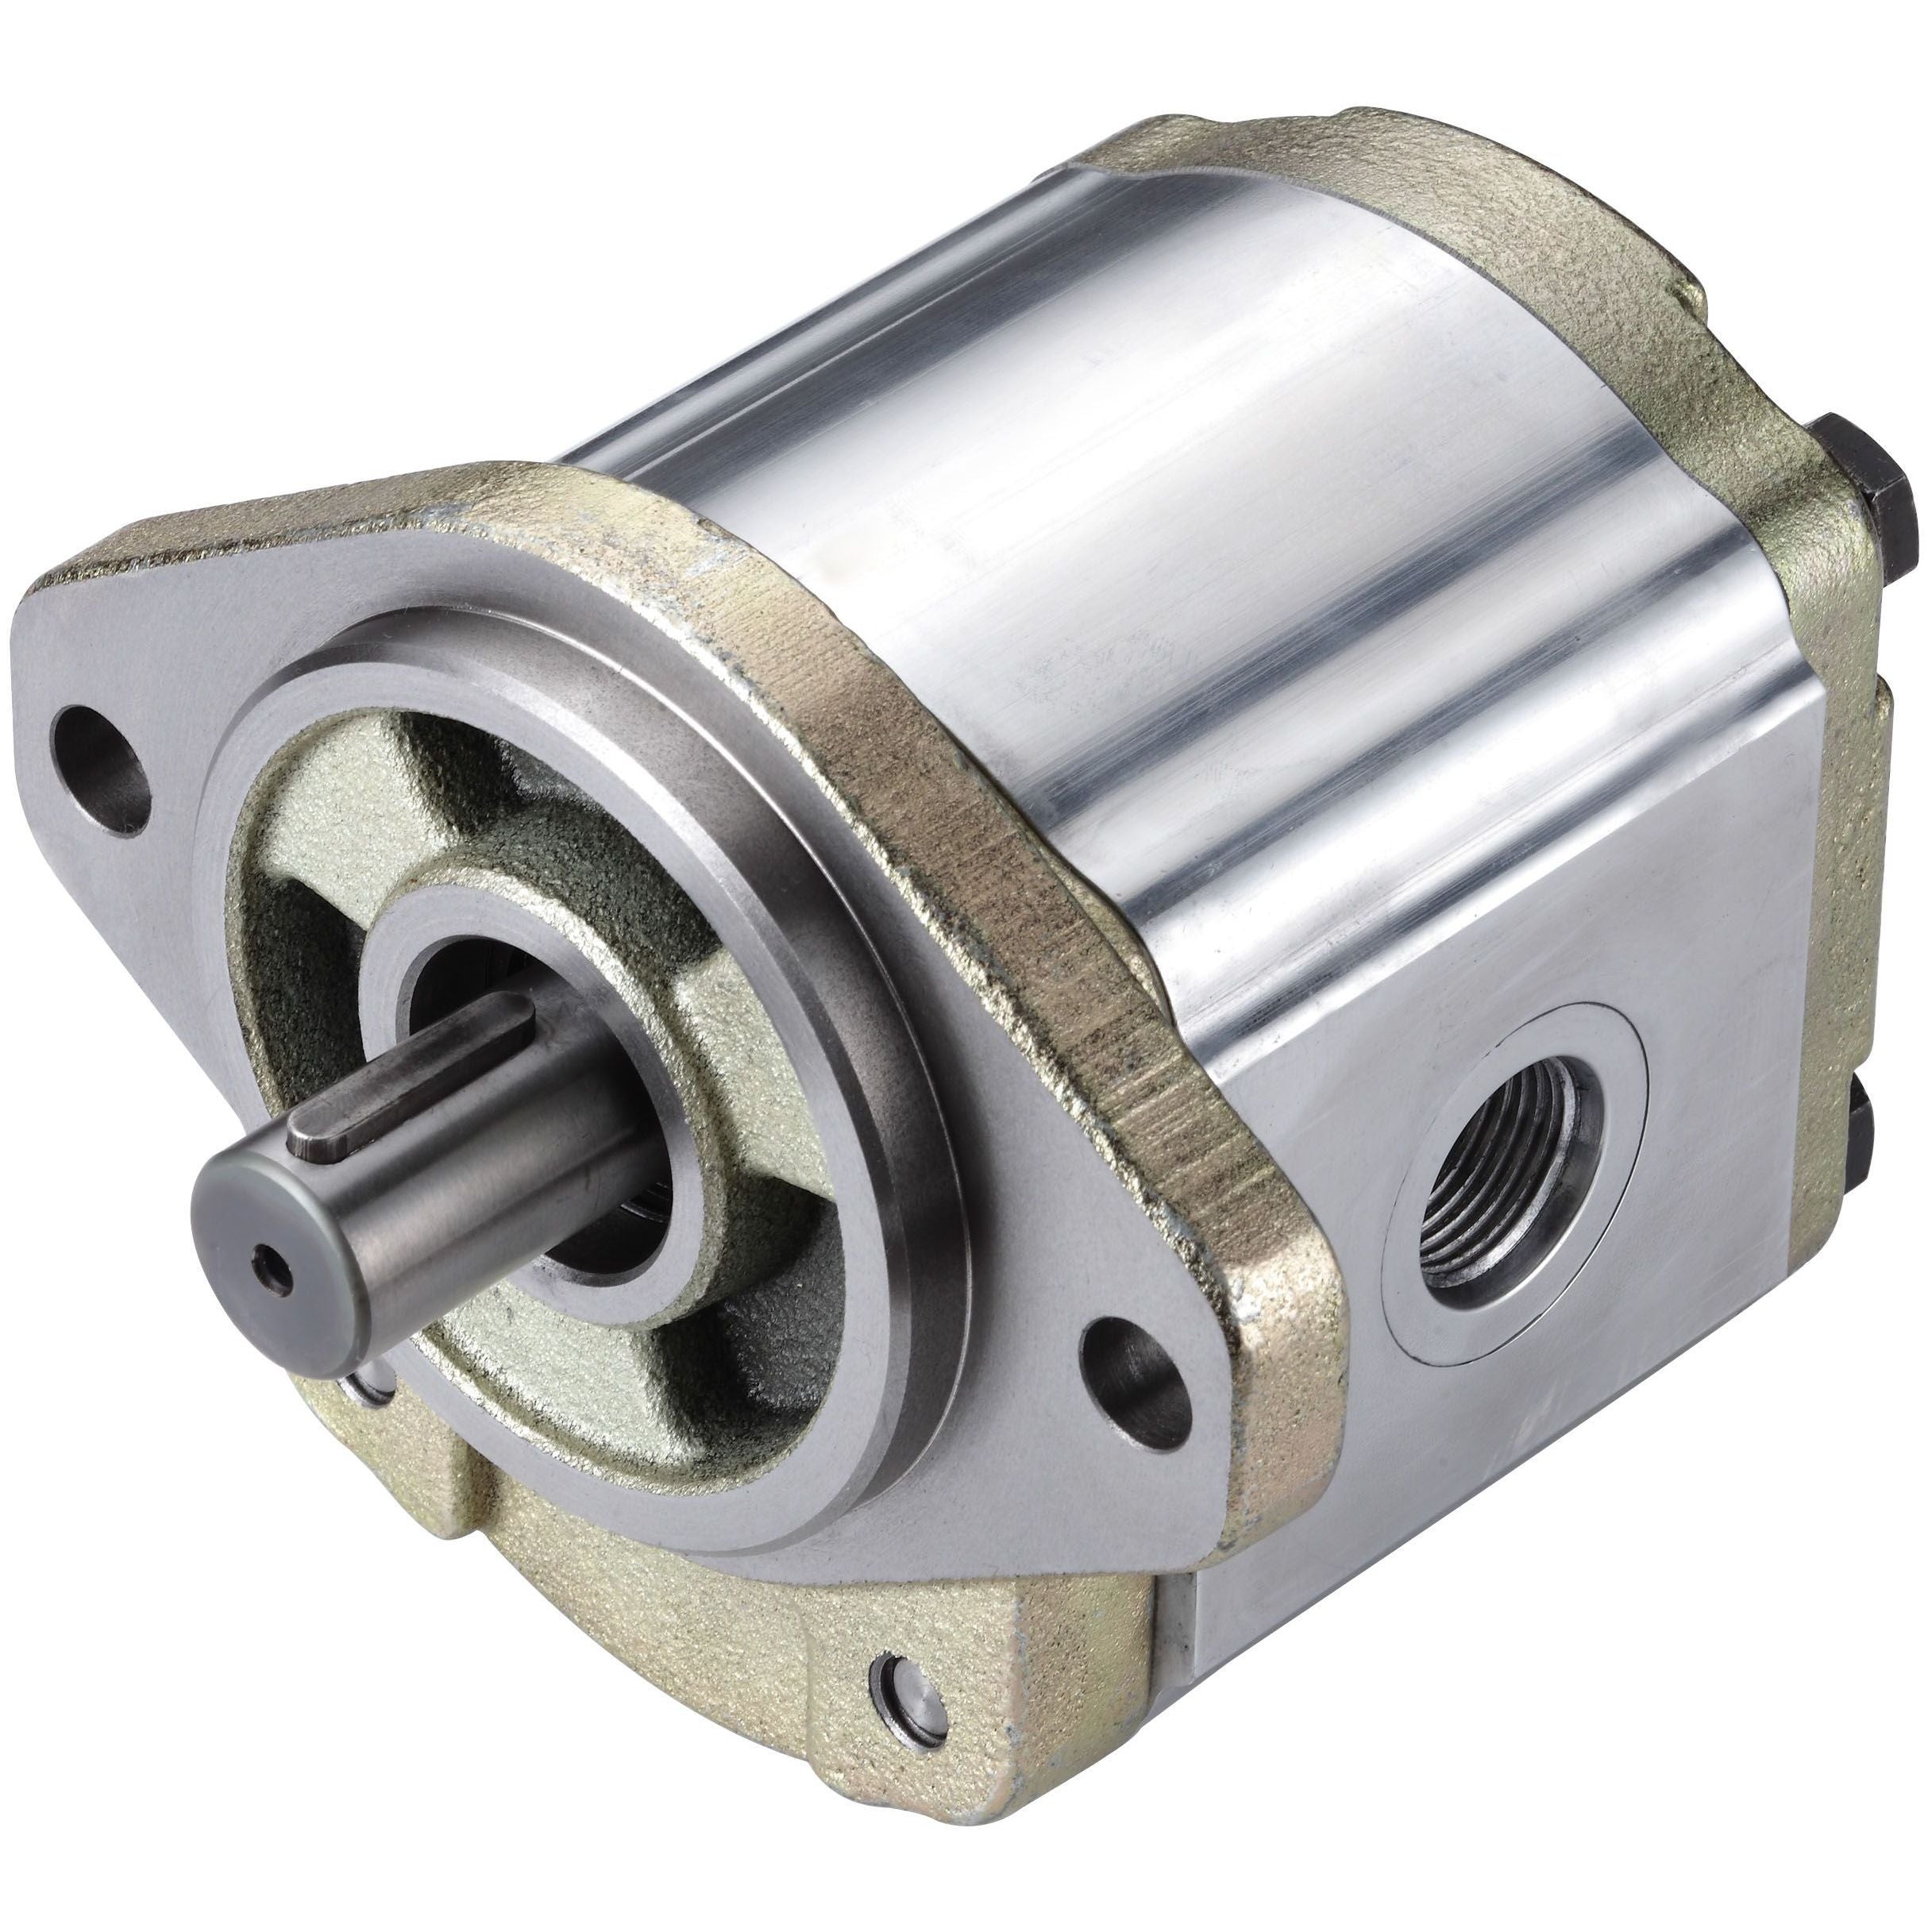 3GB8U233L : Honor Gear Pump, CCW Rotation, 33cc (2.01in3), 15.69 GPM, 3500psi, 3000 RPM, #20 SAE (1.25") In, #12 SAE (3/4") Out, Splined Shaft 13-Tooth, 16/32 Pitch, SAE B 2-Bolt Mount